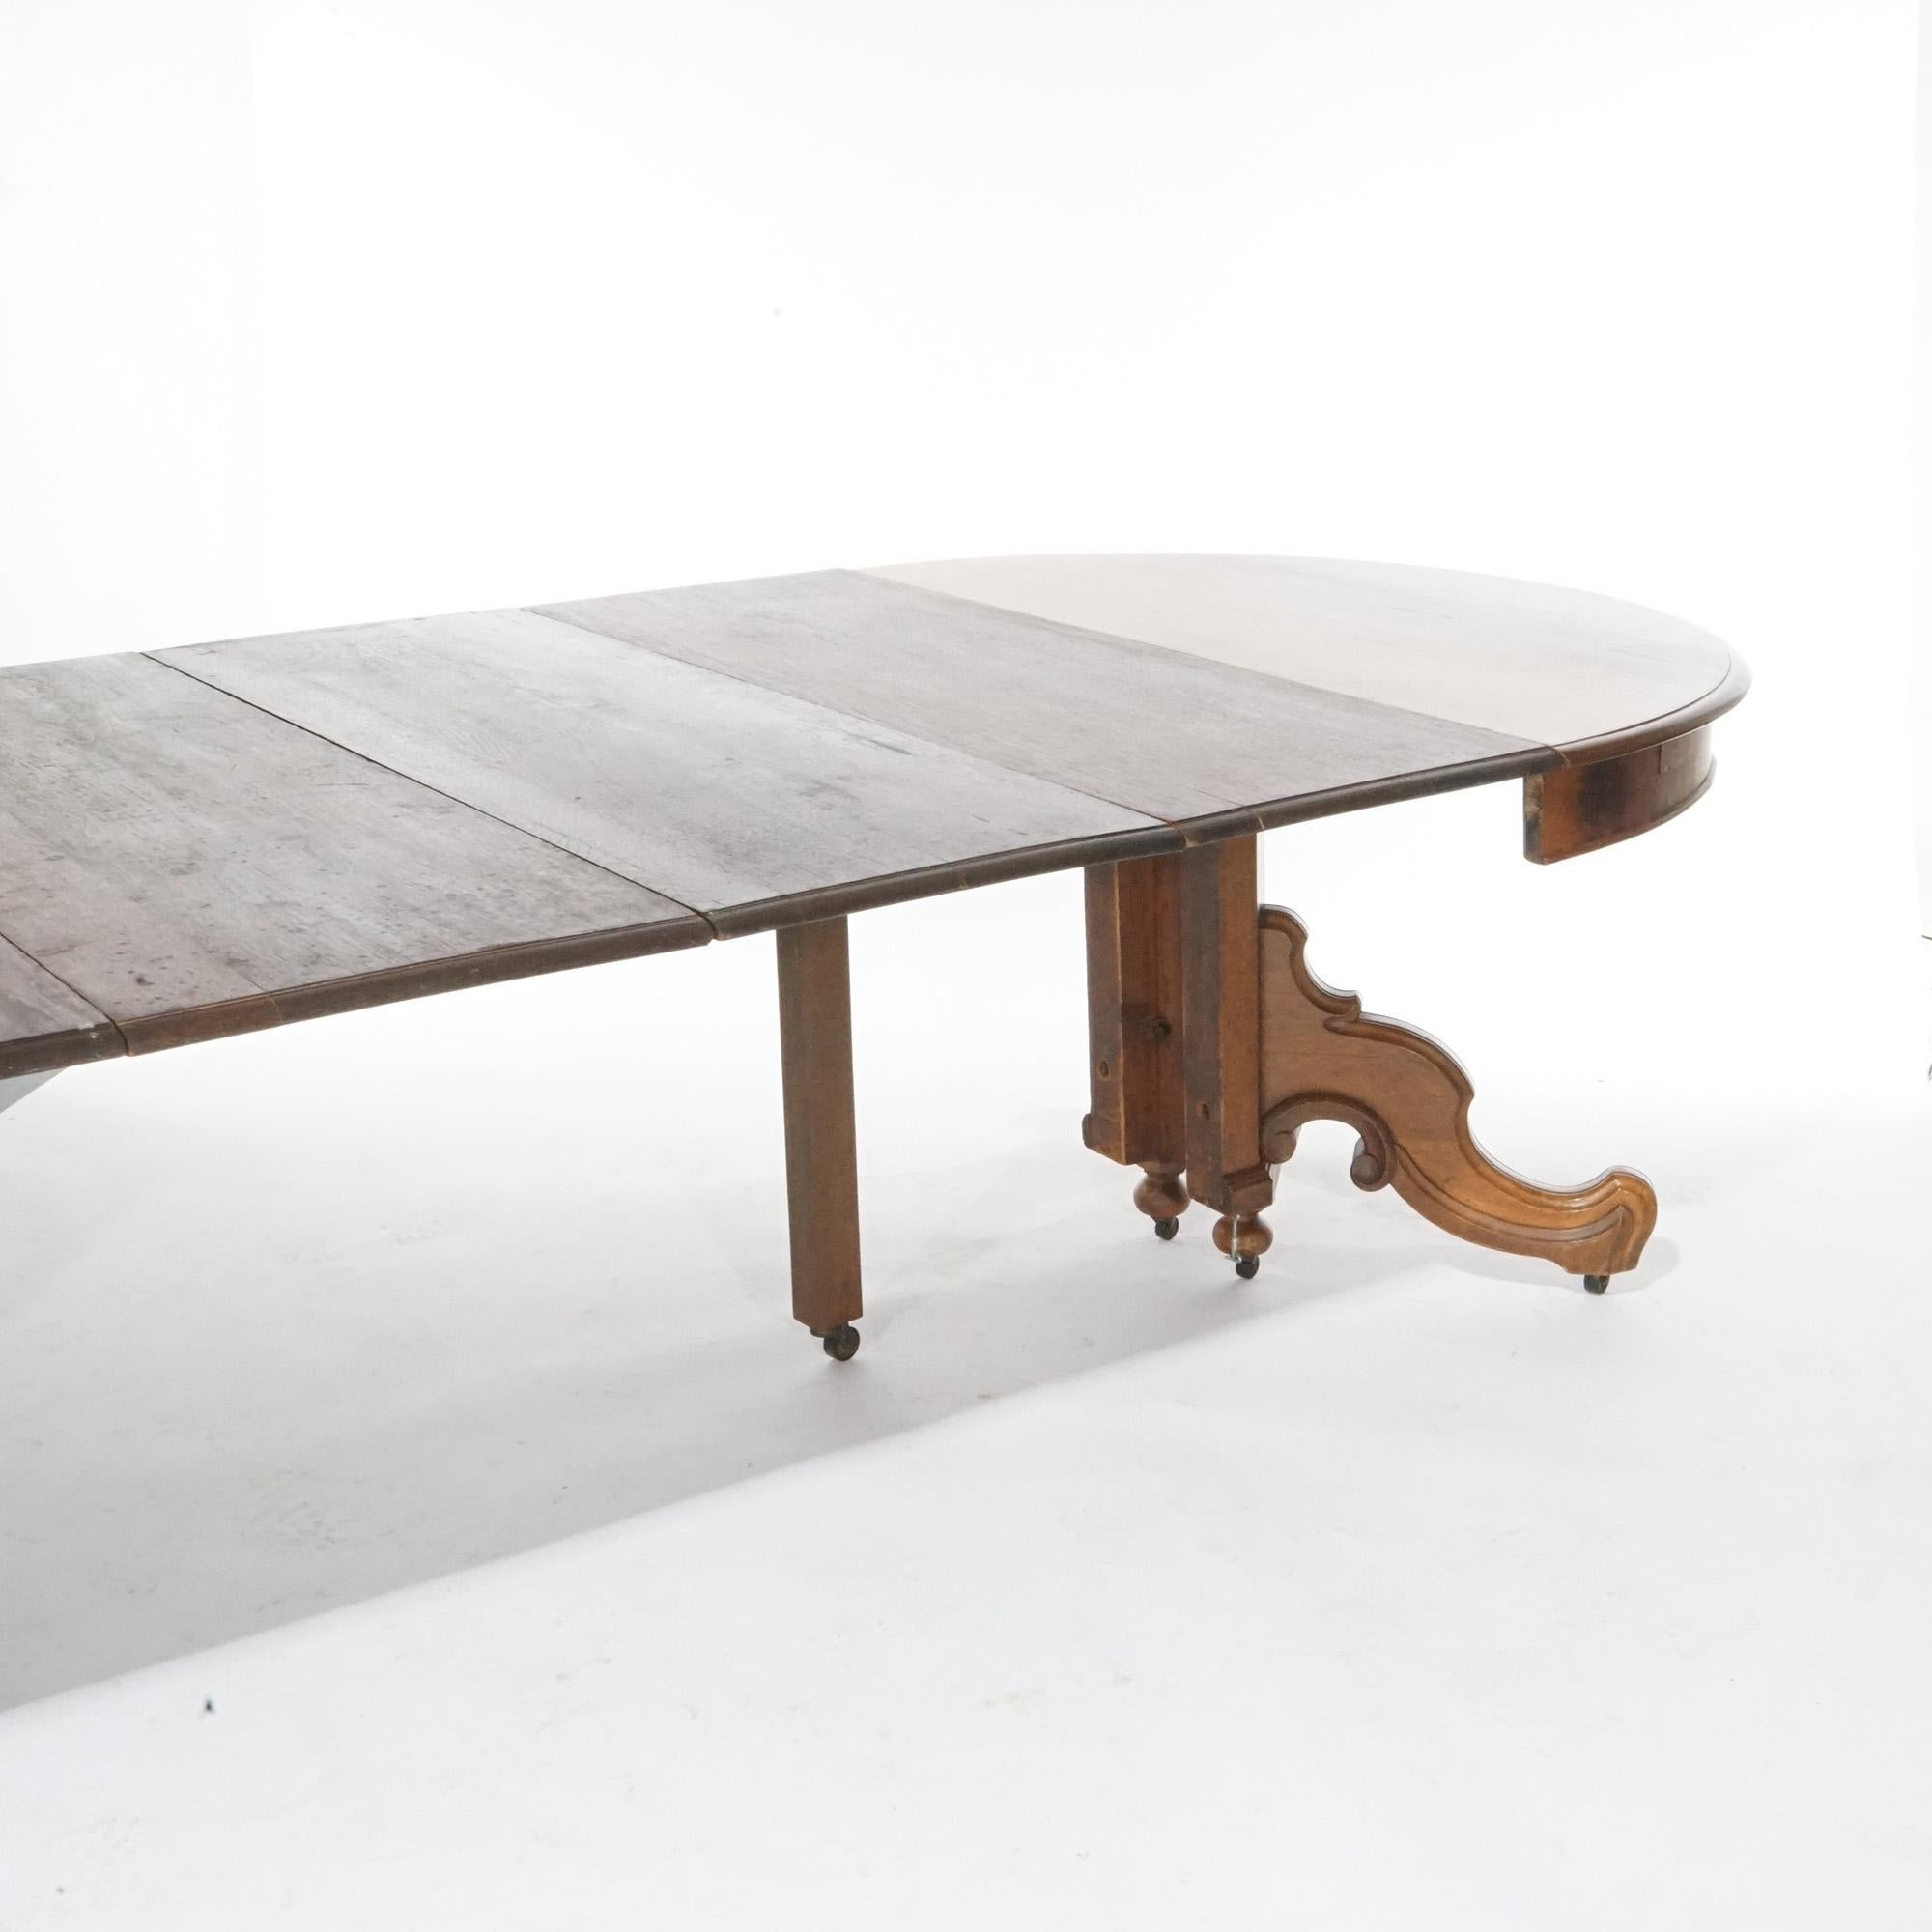 Antique Victorian Walnut Extension Split-Pedestal Dining Table with Leaves C1890 2